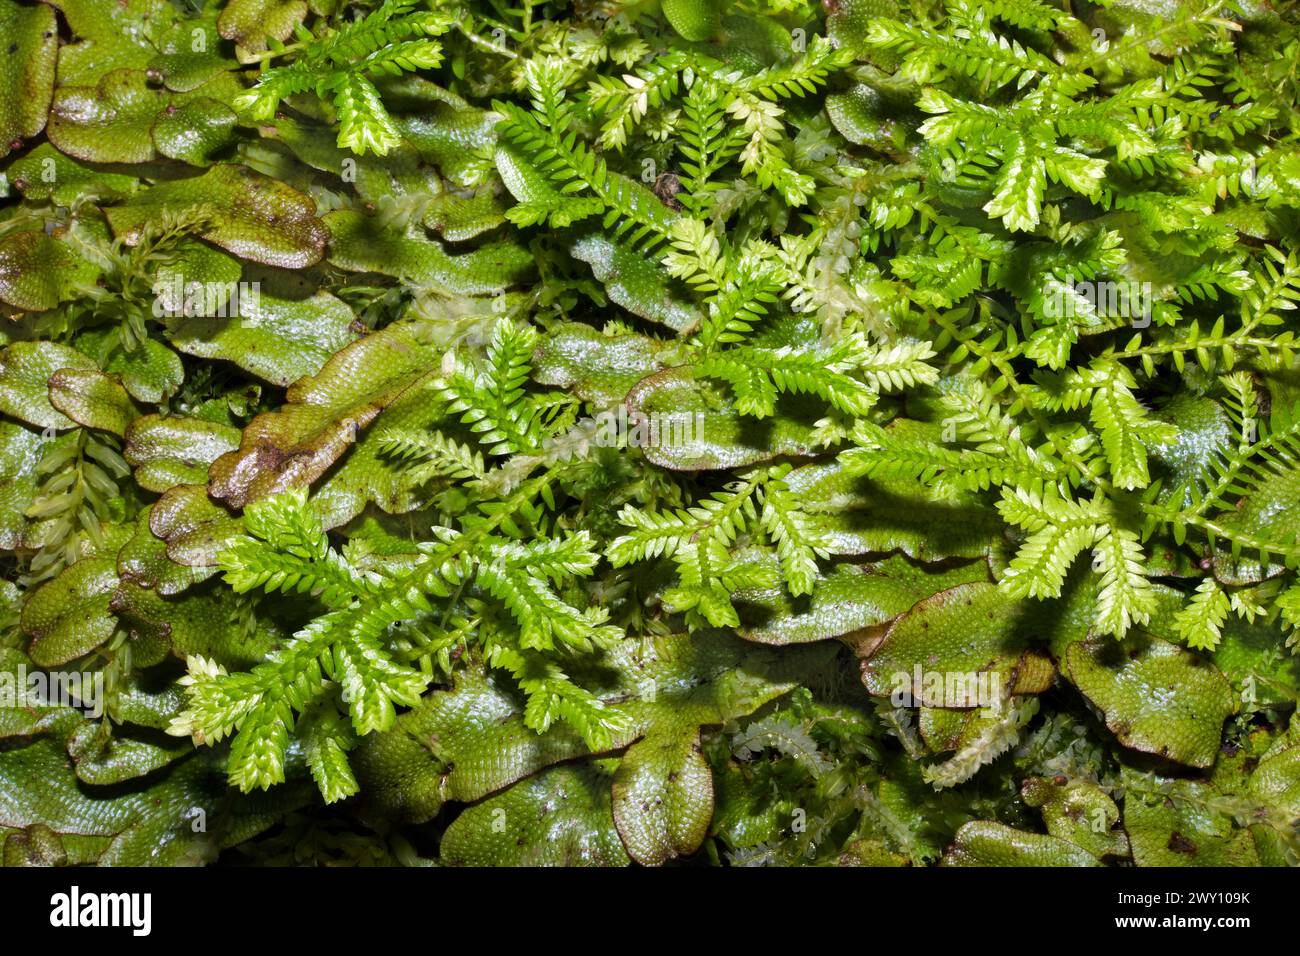 Selaginella kraussiana (African clubmoss) can form dense mats in shaded areas. It is found naturally in parts of Sub-Saharan Africa and Macaronesia. Stock Photo